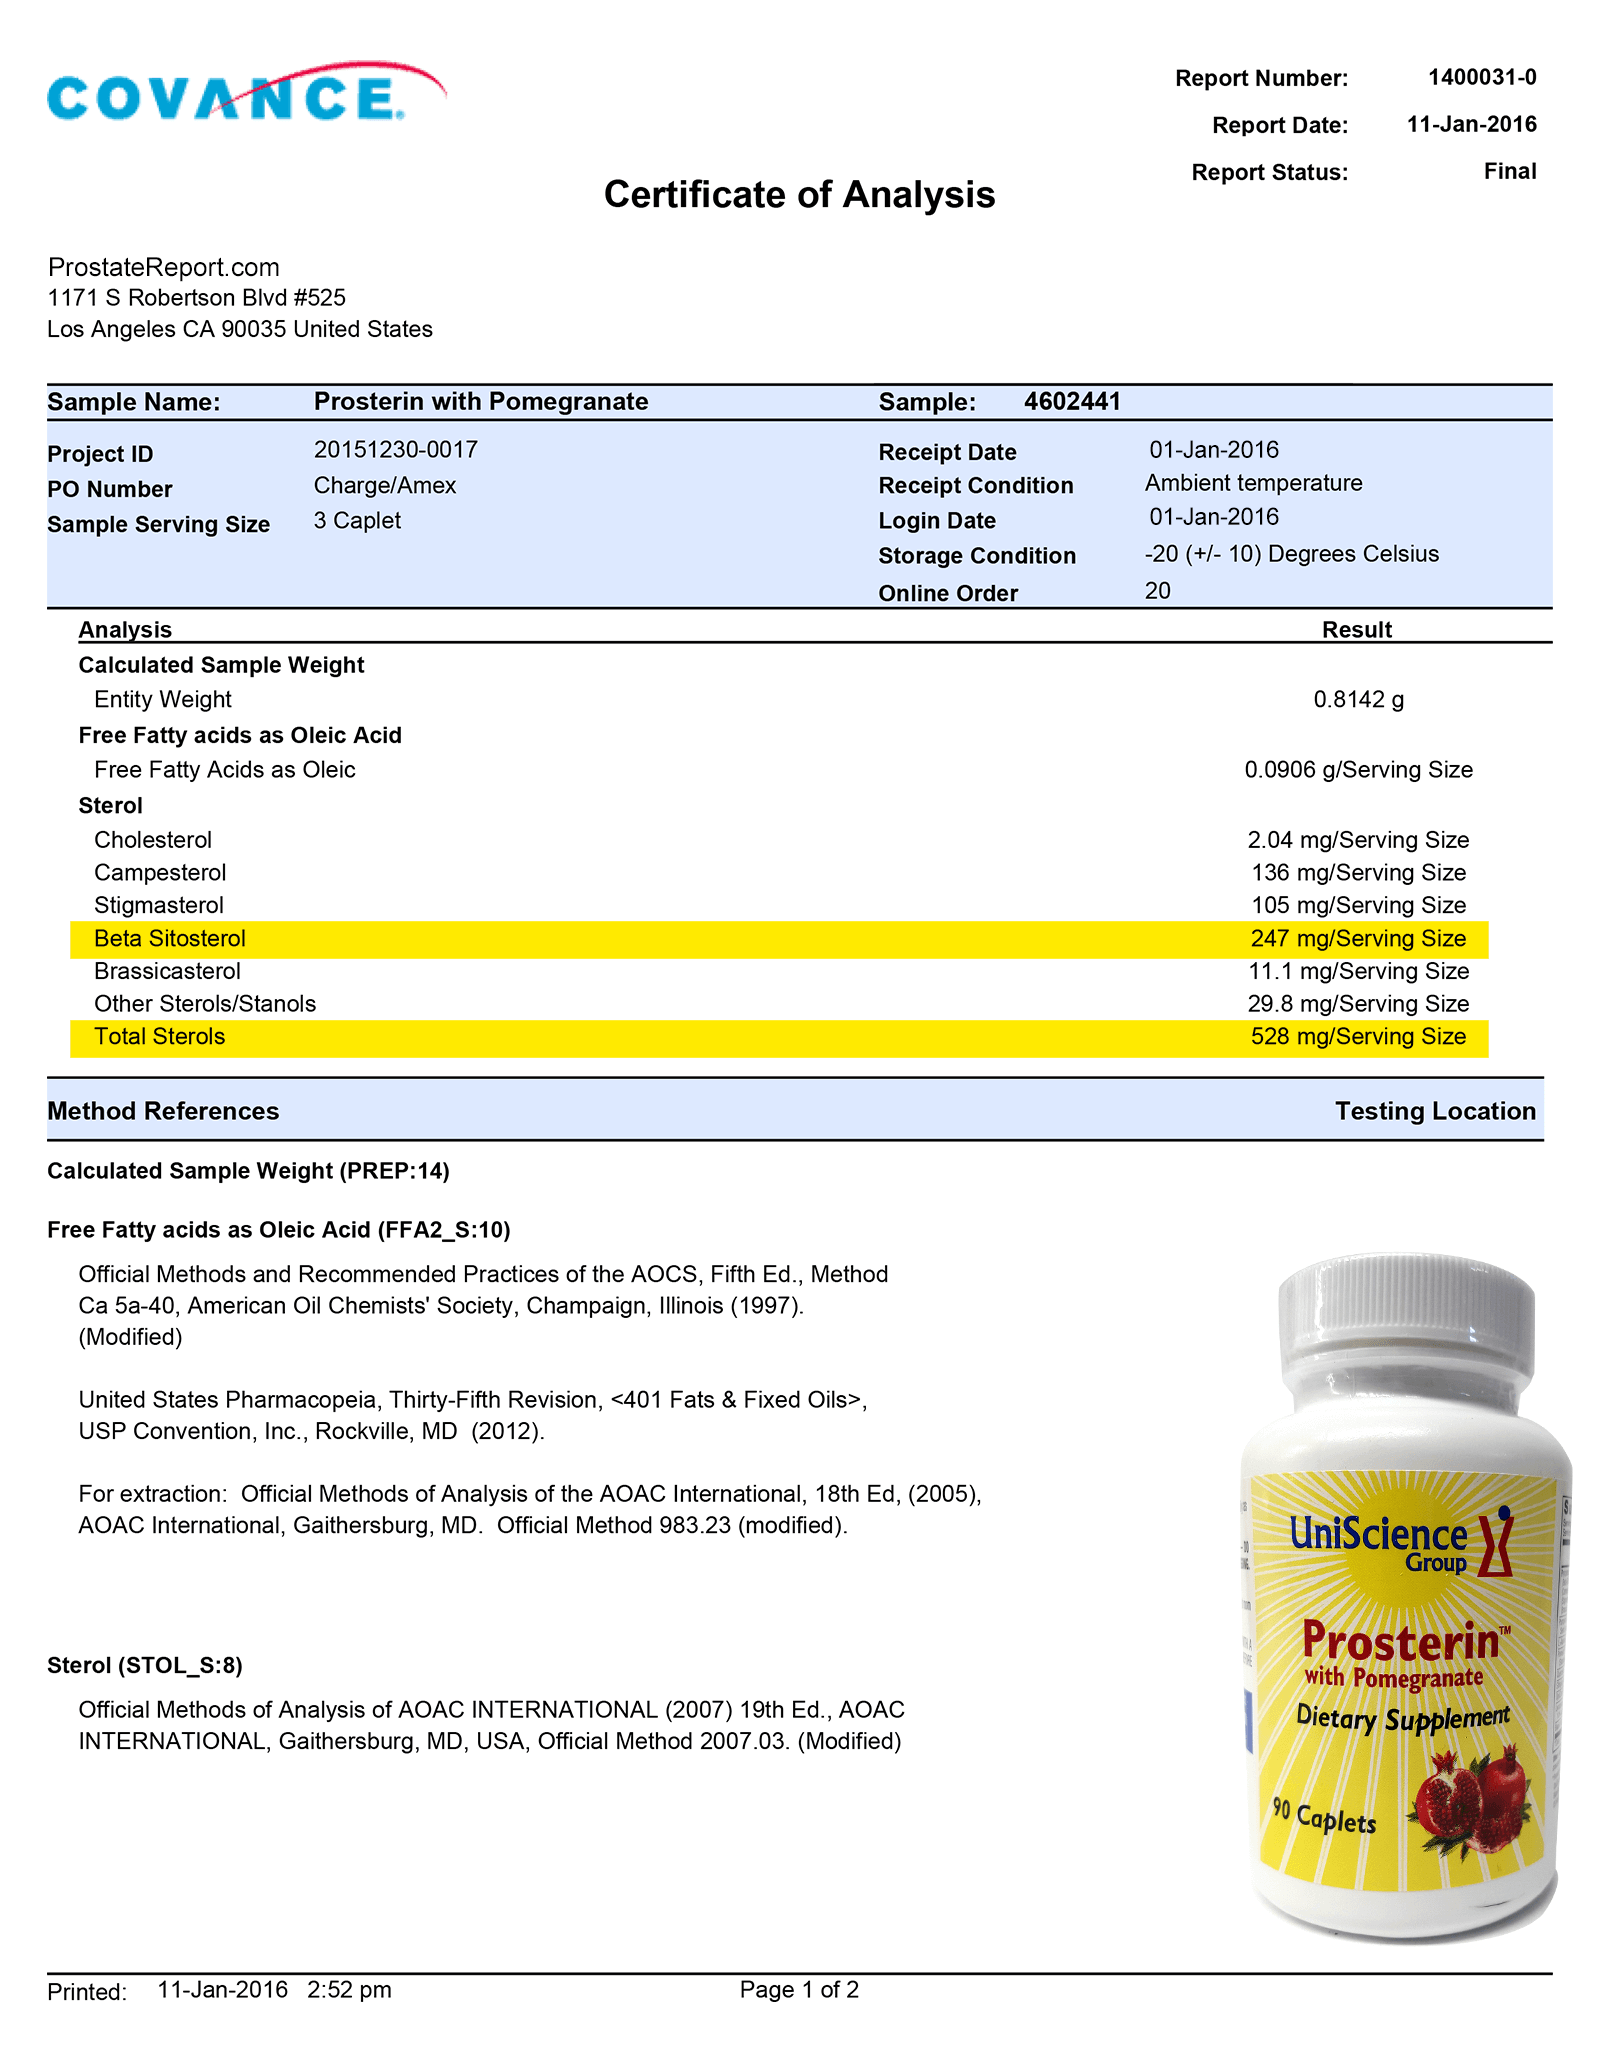 Prosterin With Pomegranate lab report 